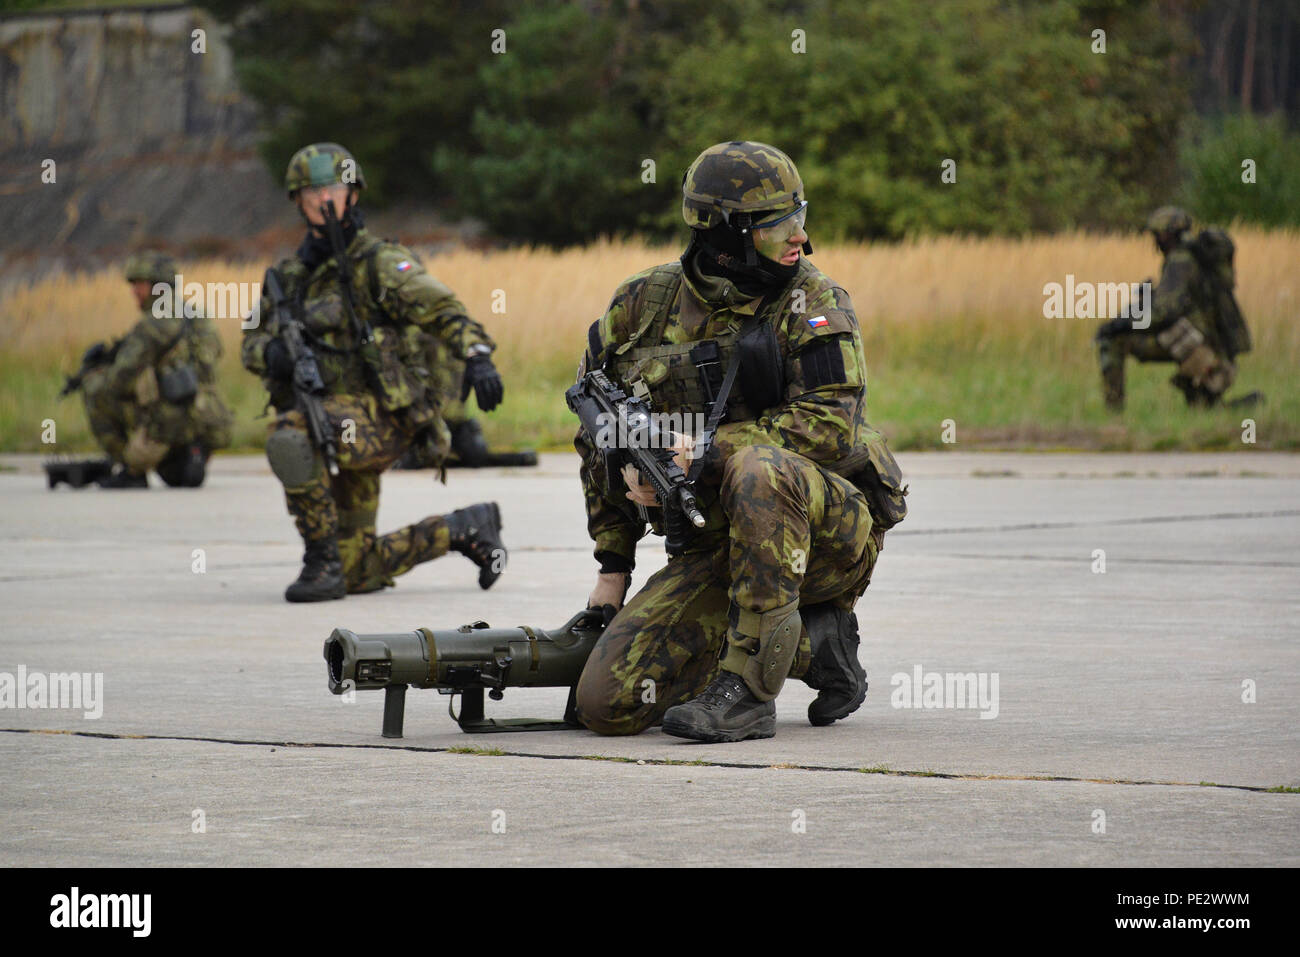 Czech army paratroopers, assigned to the 43rd Airborne Battalion, 4th Rapid Reaction Brigade, provide security as part of Exercise Sky Soldier II at the Bechyne Training Area, Czech Republic, Sept. 24, 2015. Sky Soldier is a series of bilateral exercises between the 173rd Airborne and 4th Rapid Reaction Brigades designed to increase interoperability and strengthen partnerships between NATO airborne forces. (U.S. Army photo by Visual Information Specialist Gertrud Zach/released) Stock Photo